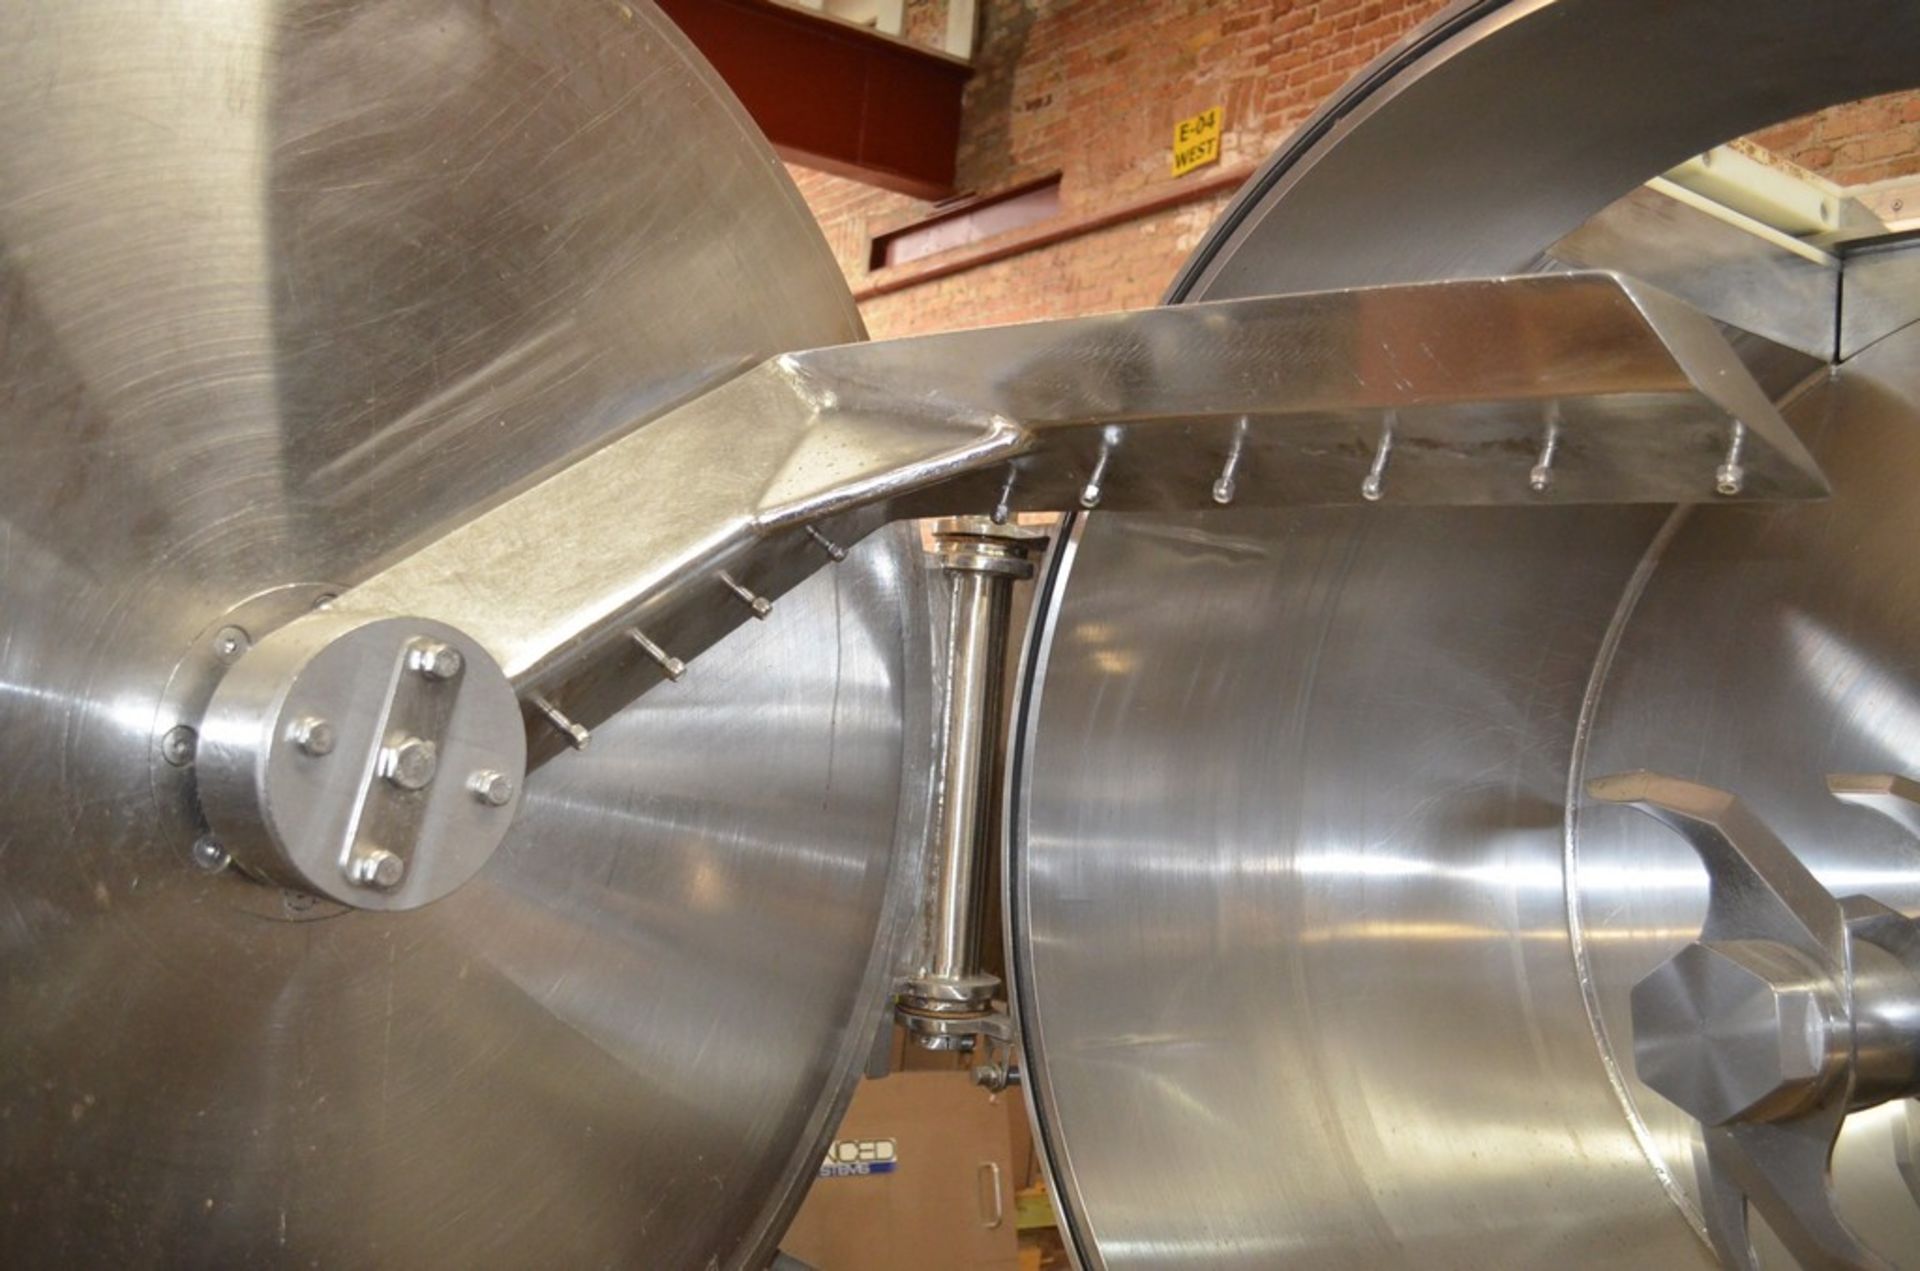 Advanced Food Systems Model ABM1000 1,000 Pound Stainless Steel Batch Mixer with 150 HP Drive, - Image 11 of 14